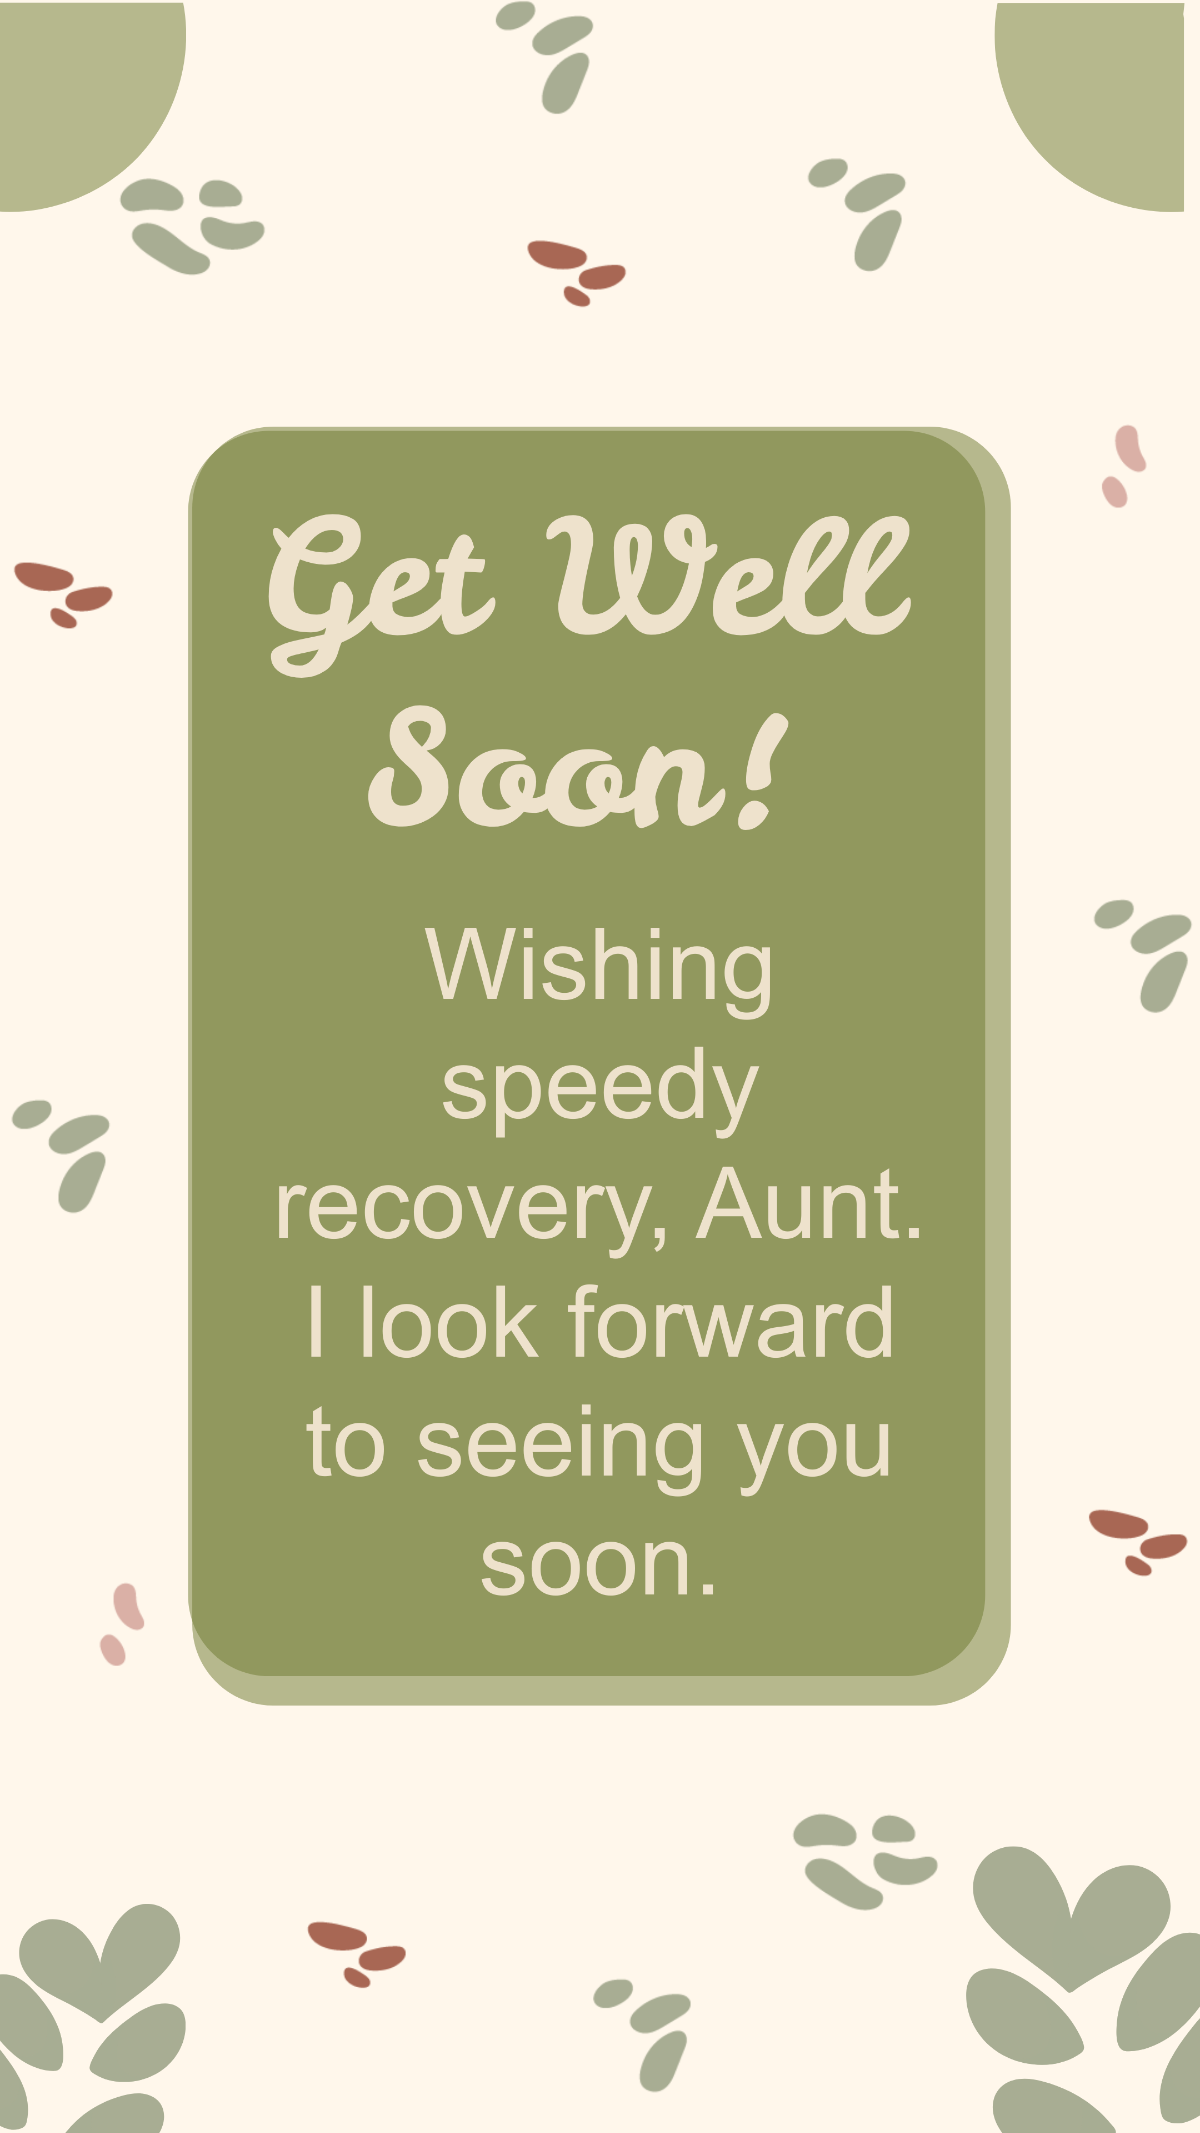 Get Well Soon Message For Aunt